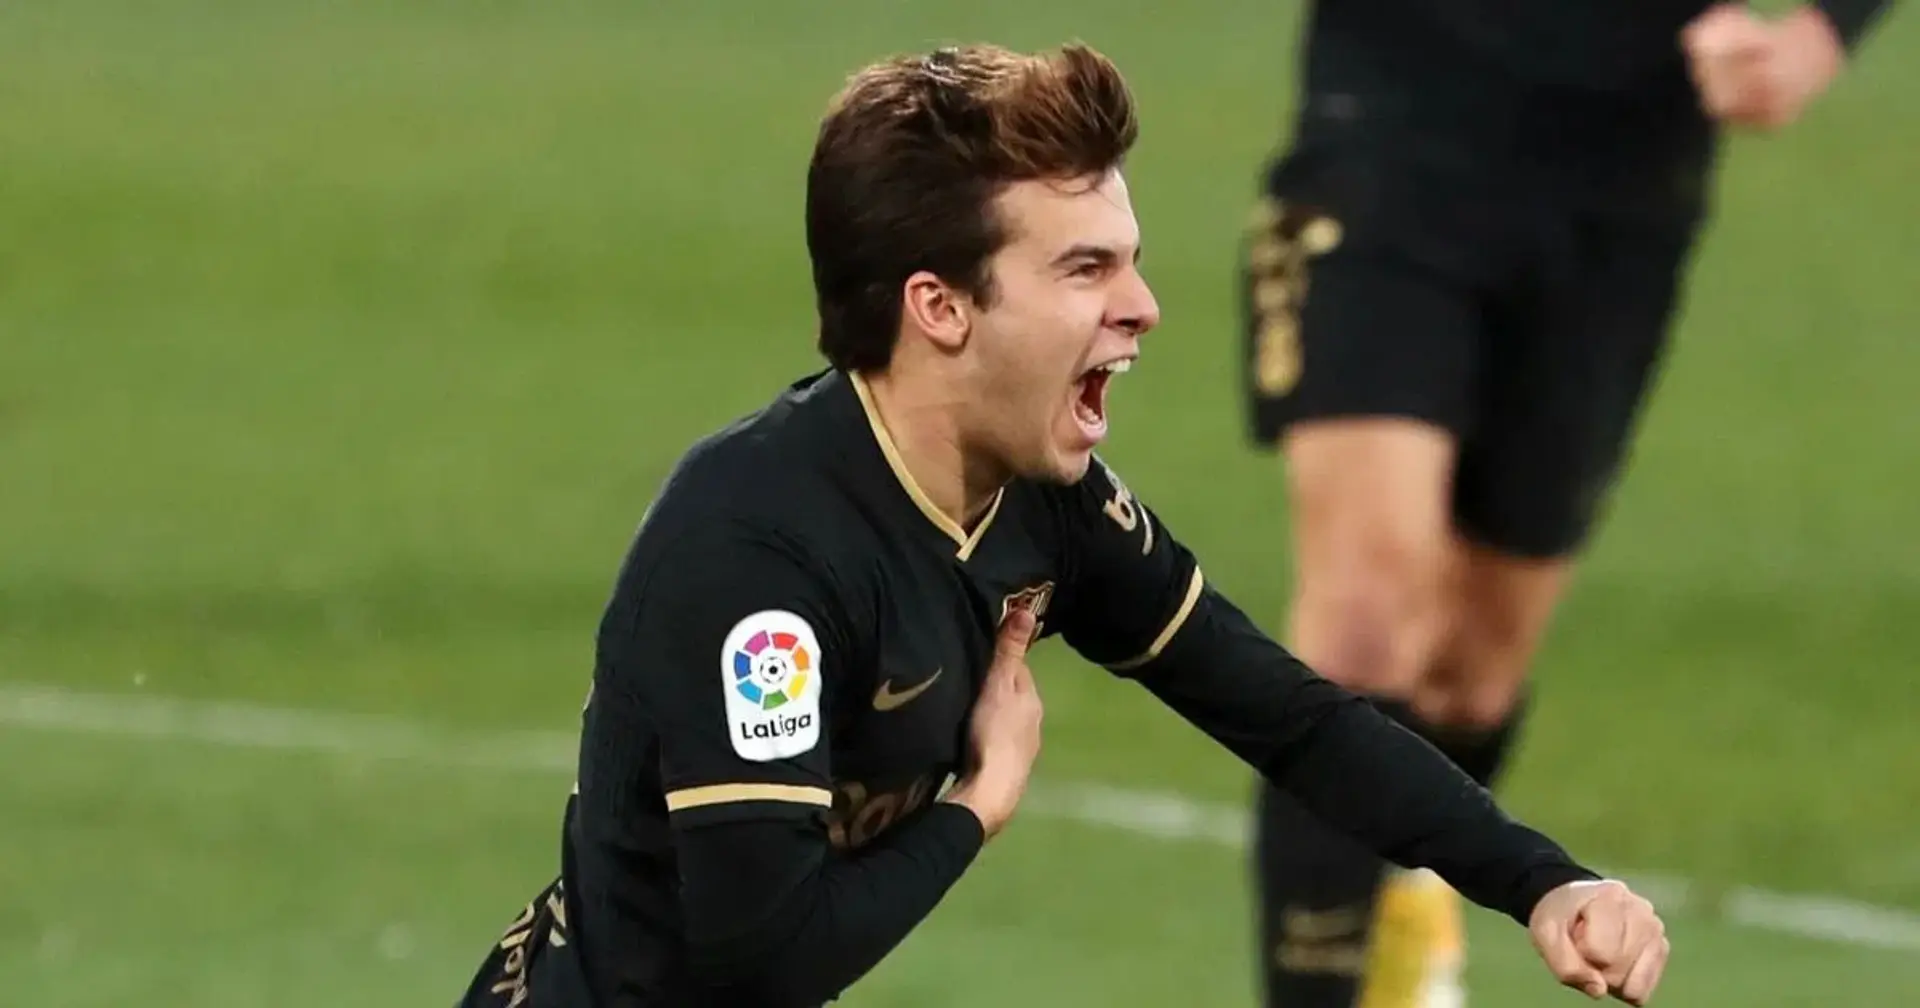 Juventus and Inter interested in Riqui Puig, set to offer swap deals (reliability: 3 stars)